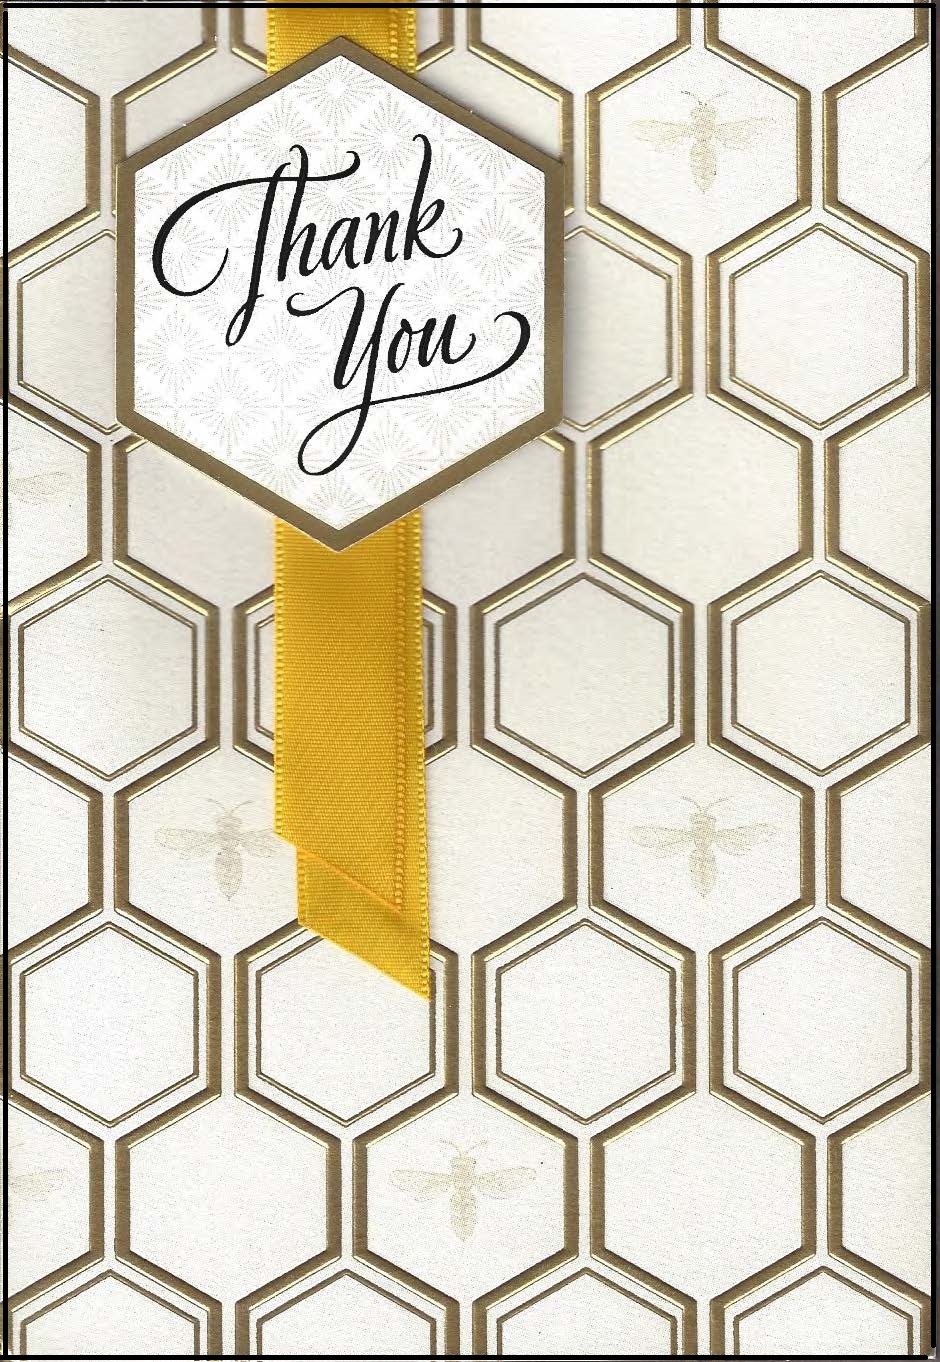 View the Thank You card